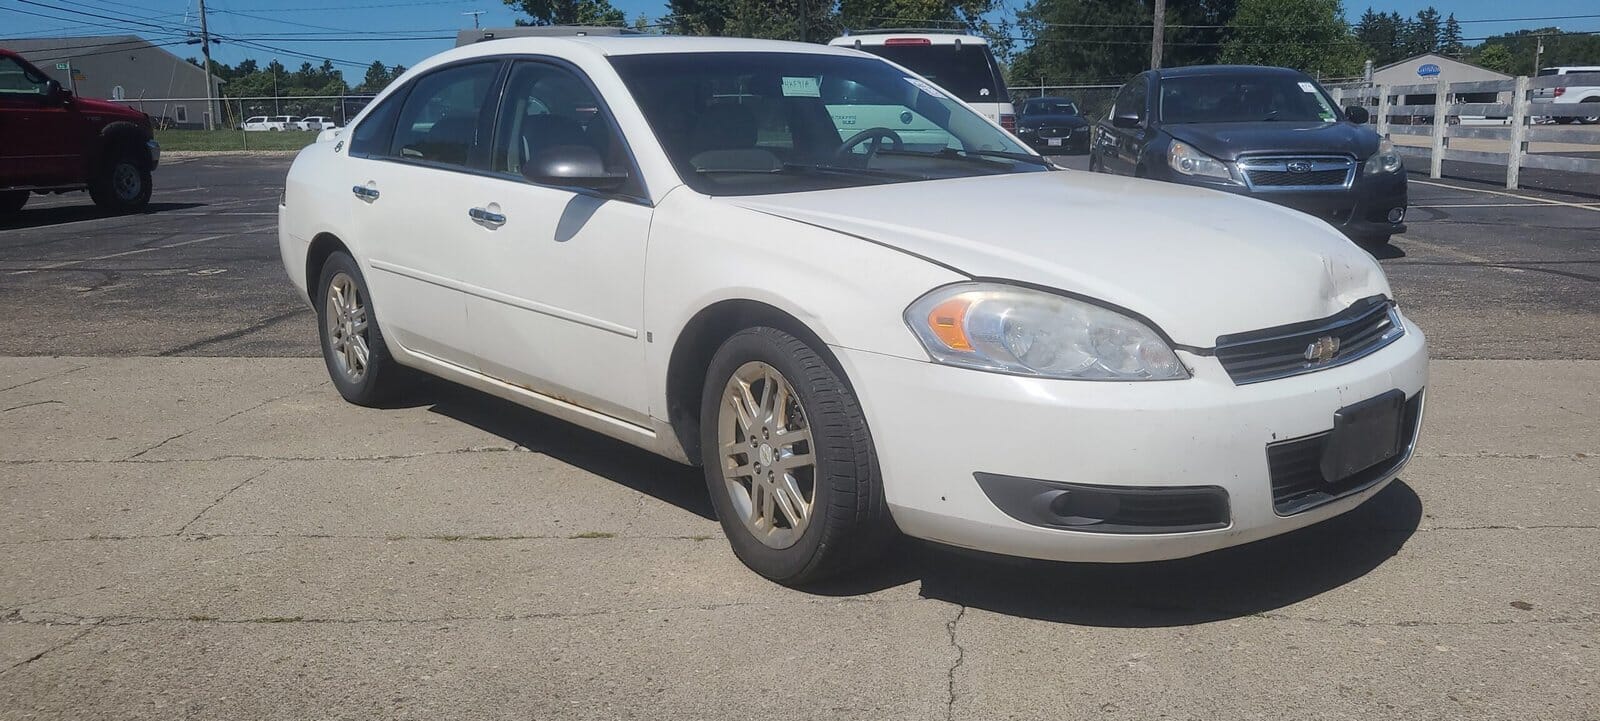 Read more about the article 2007 Chevrolet Impala